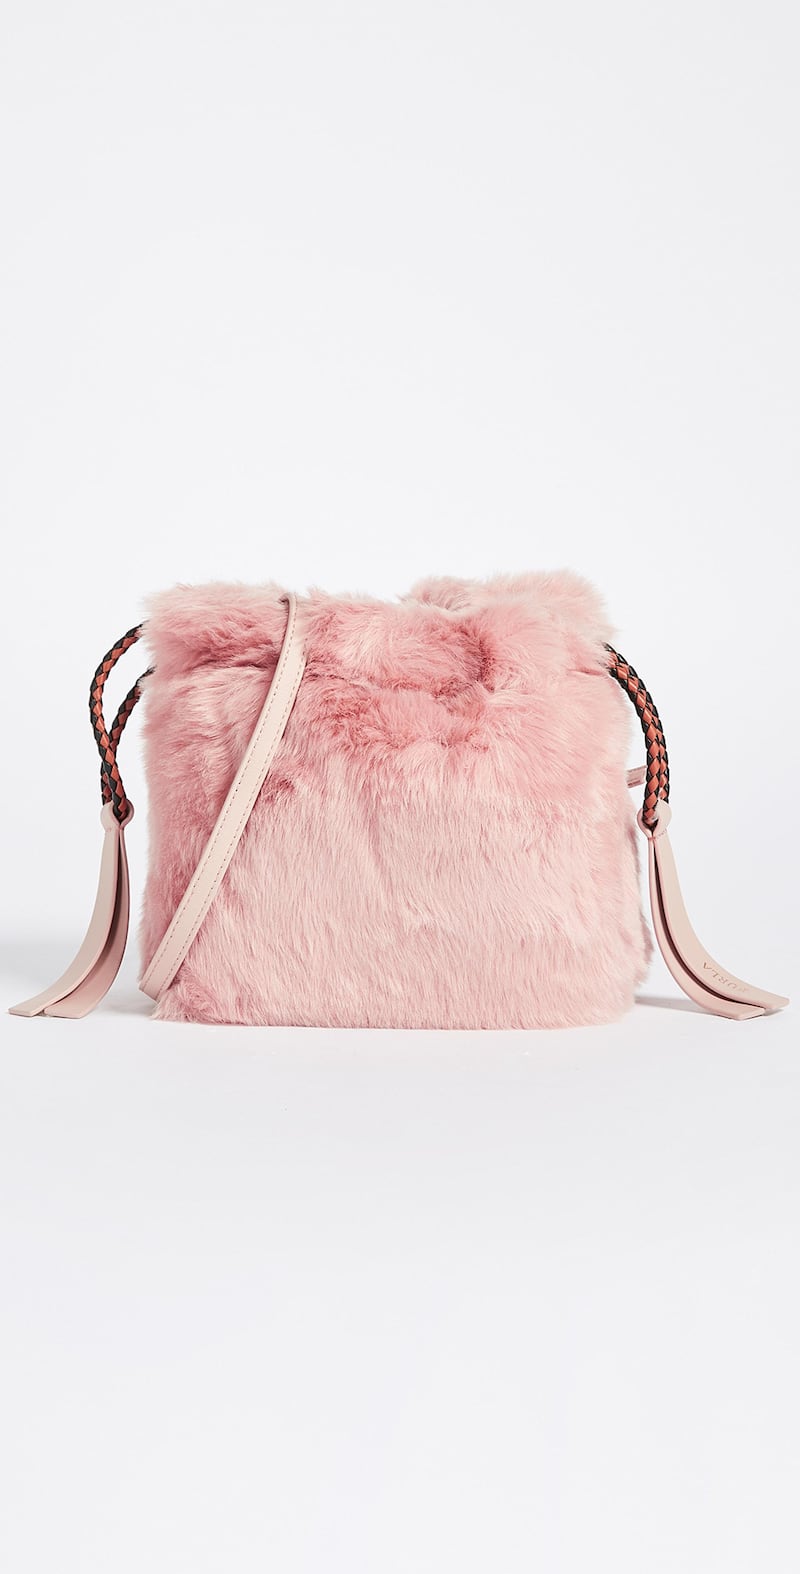 Furla committed to replace all fur with faux-fur on March 15, starting from its cruise 2019 collection